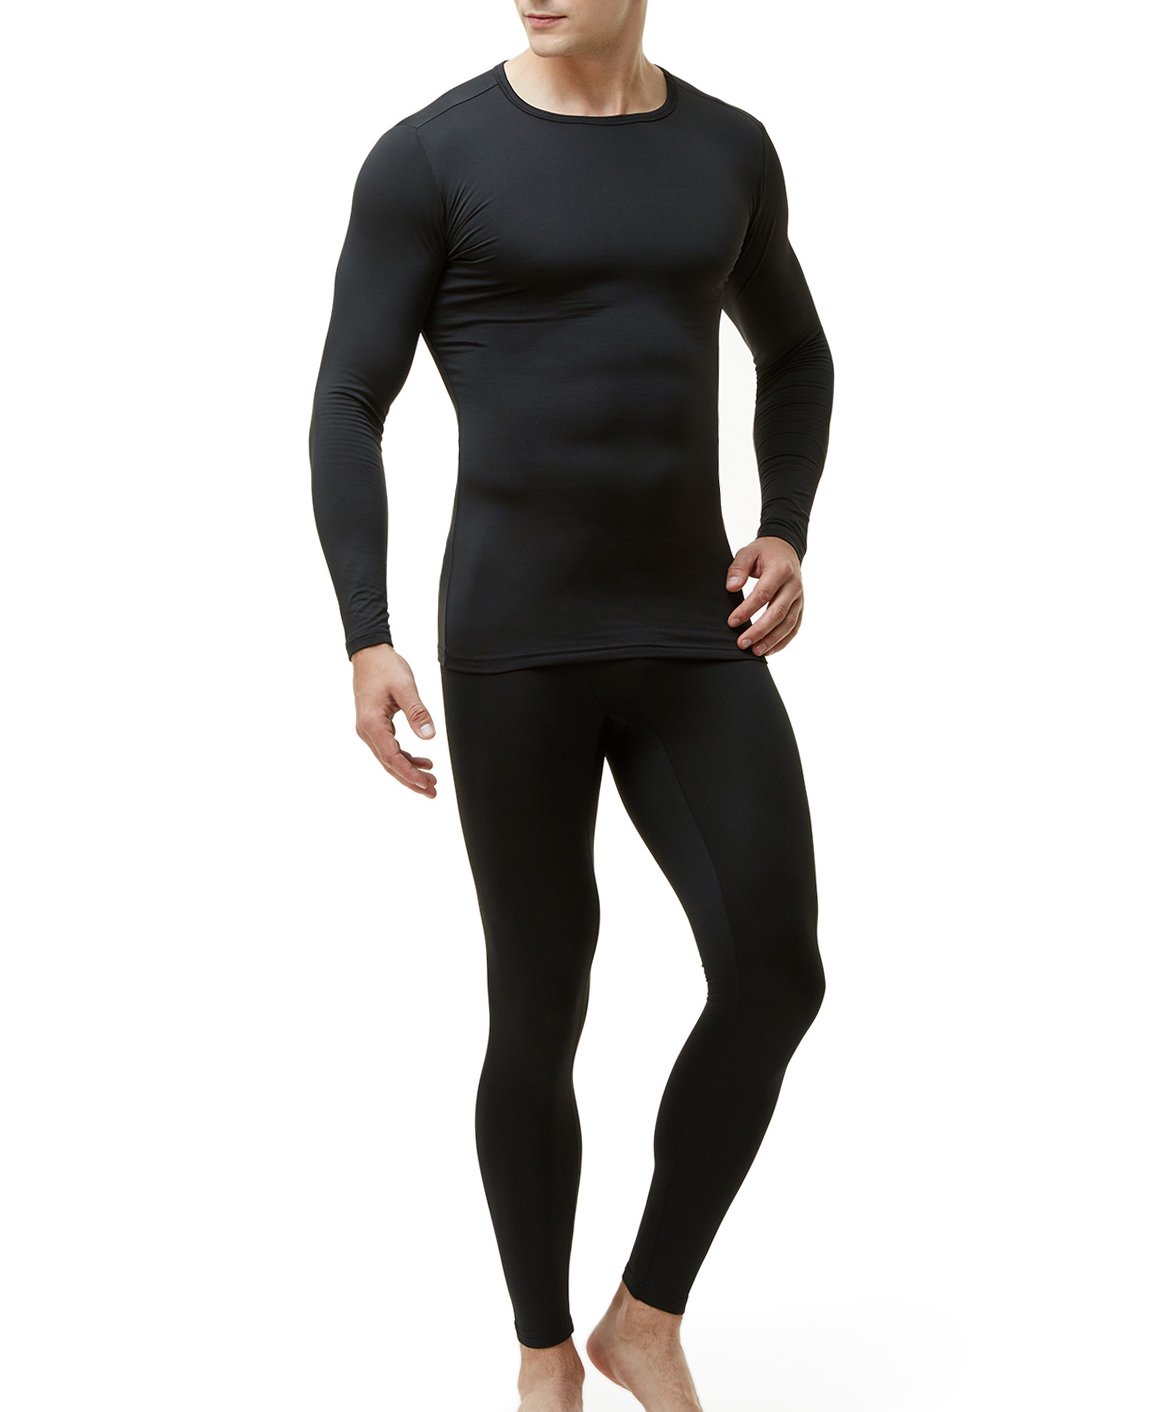 Thermal Underwear,Thermal Winter Warm Base Layer Tops Leggings,for